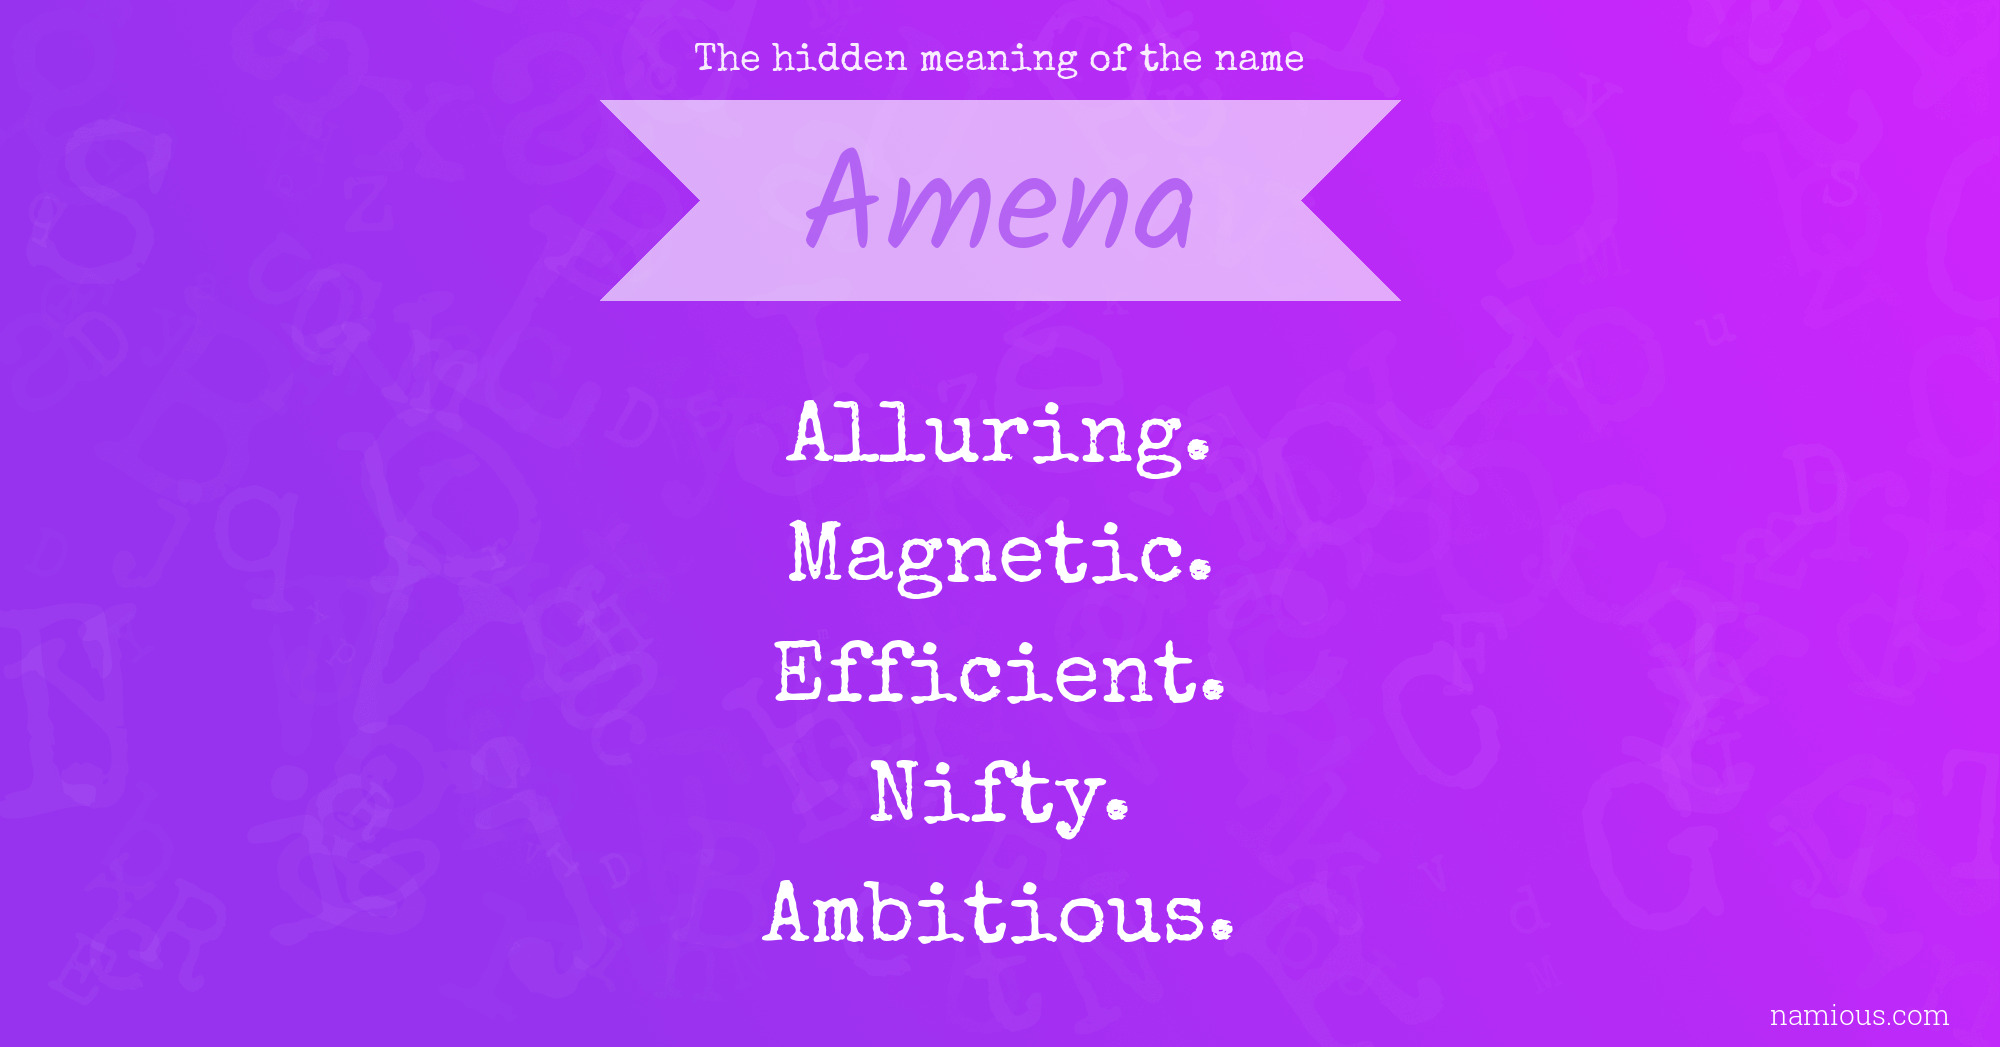 The hidden meaning of the name Amena